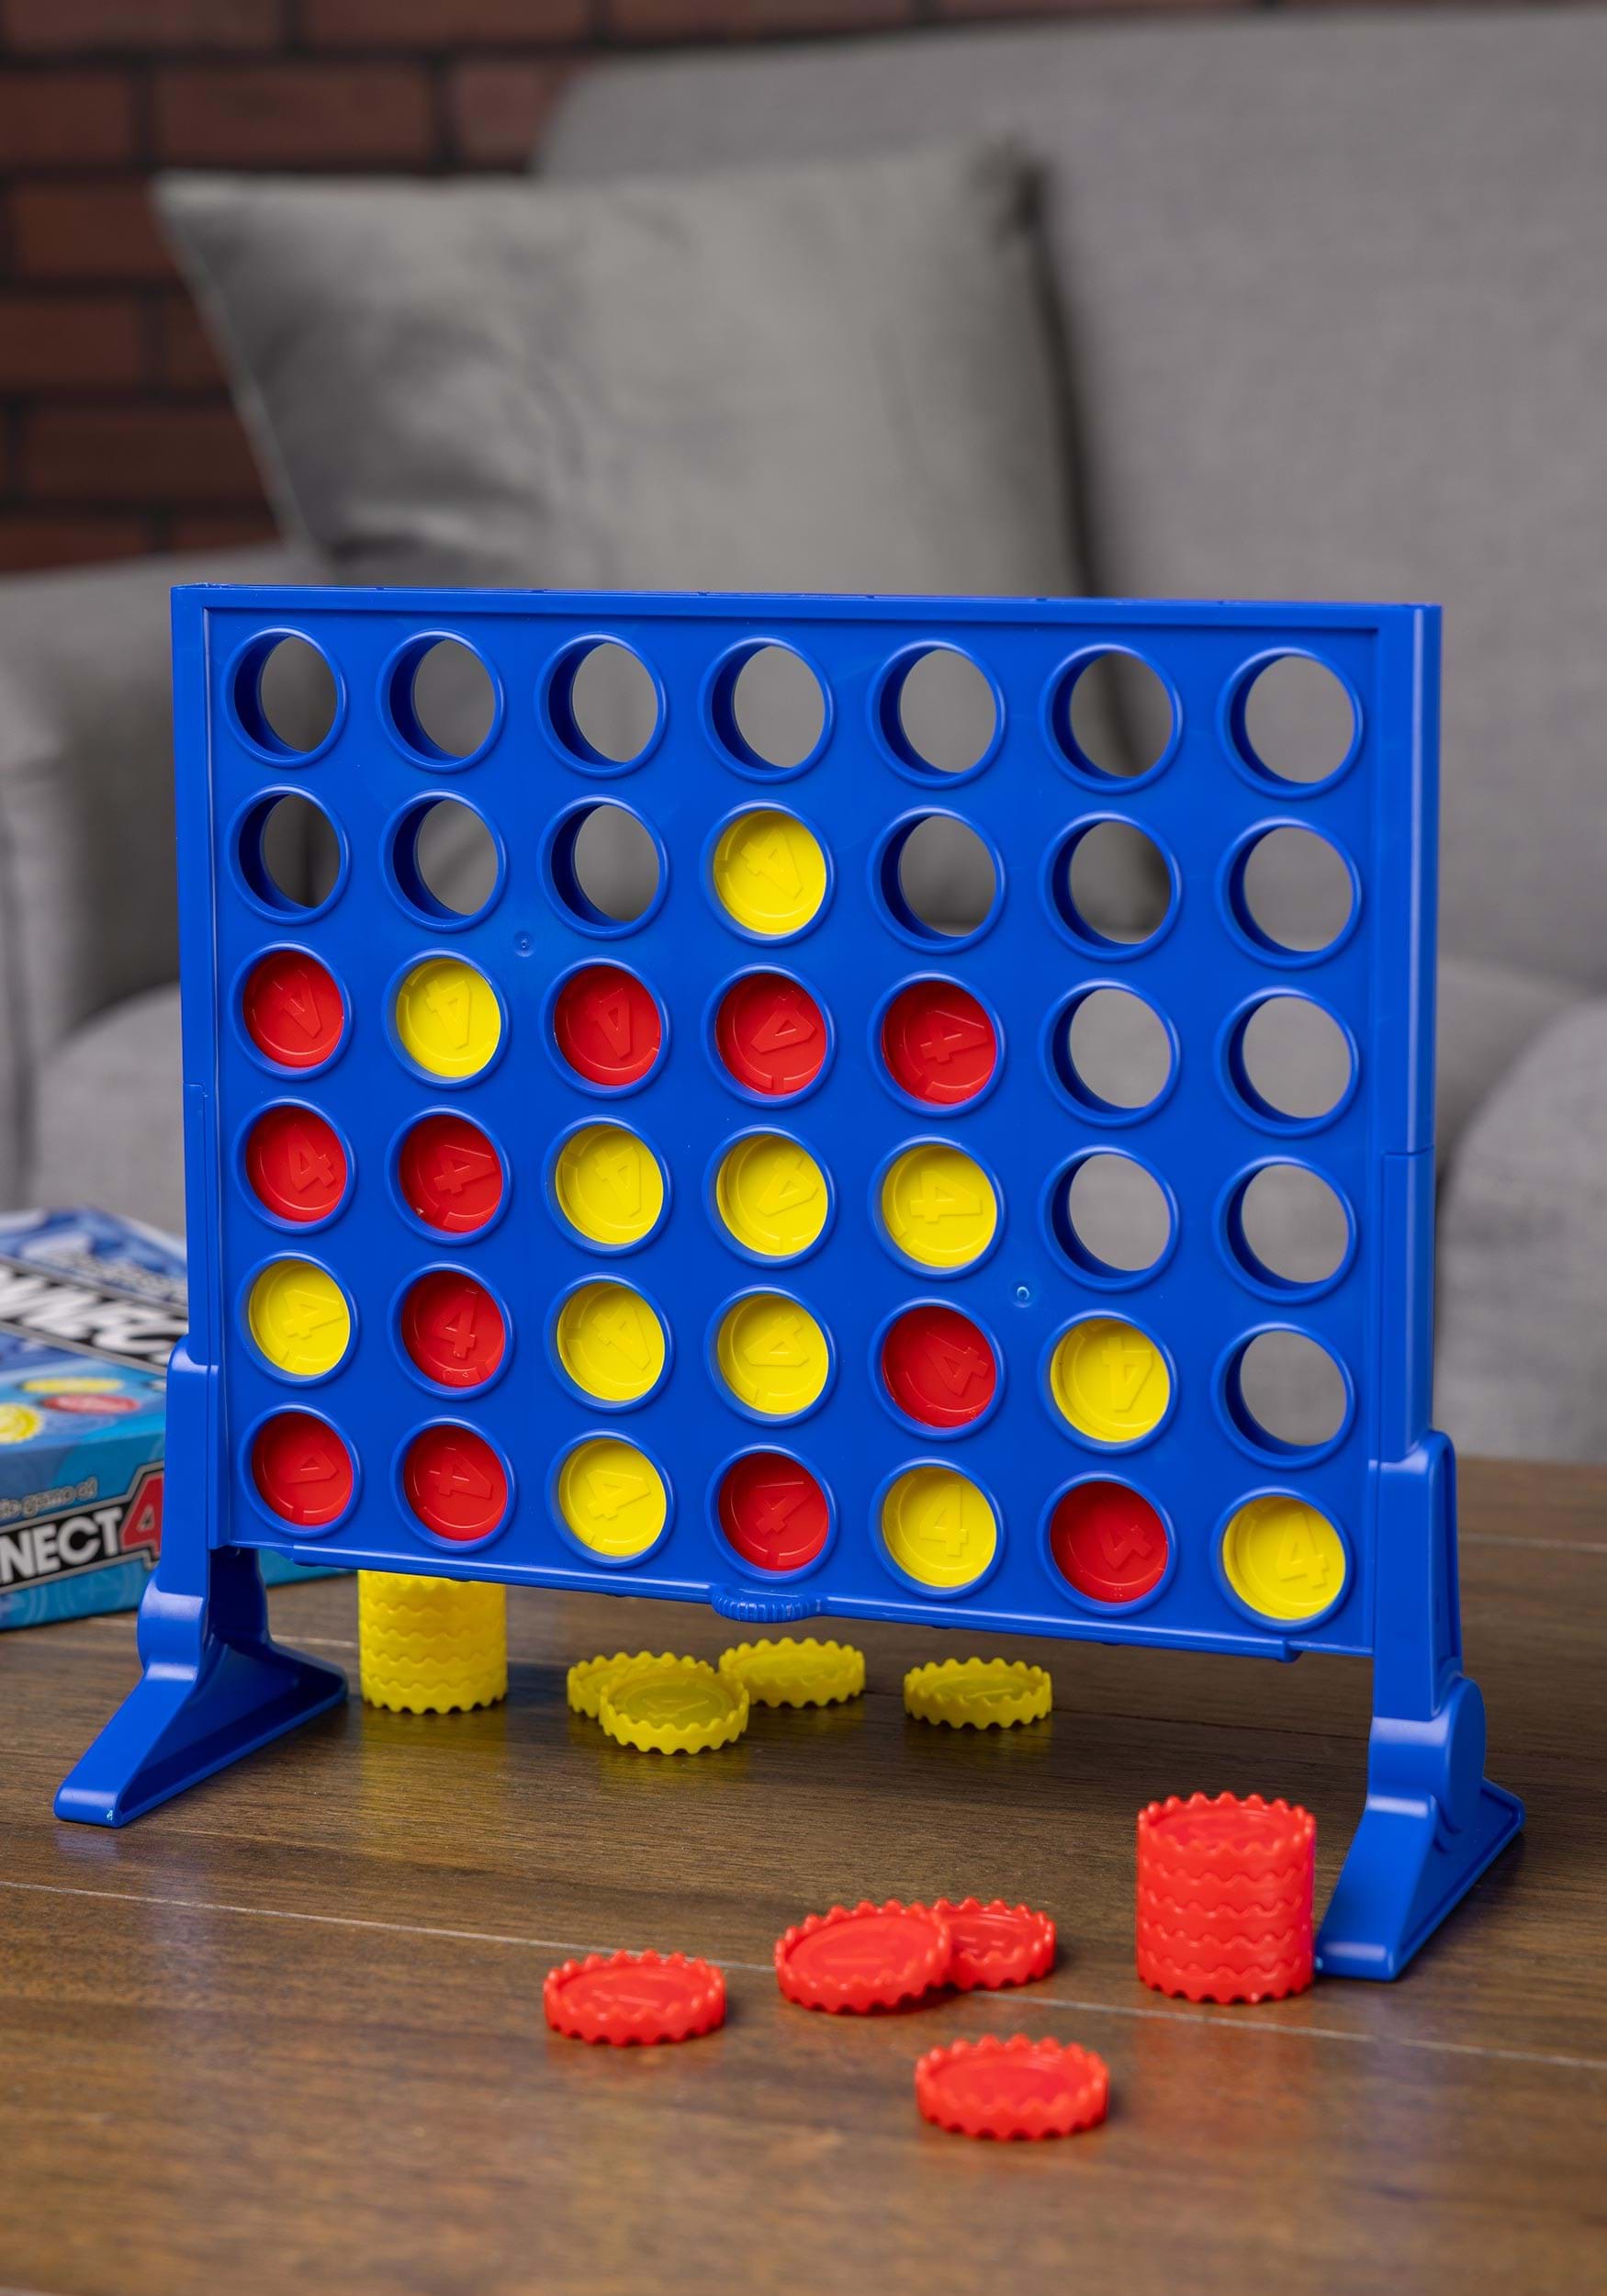 Connect 4 the Game